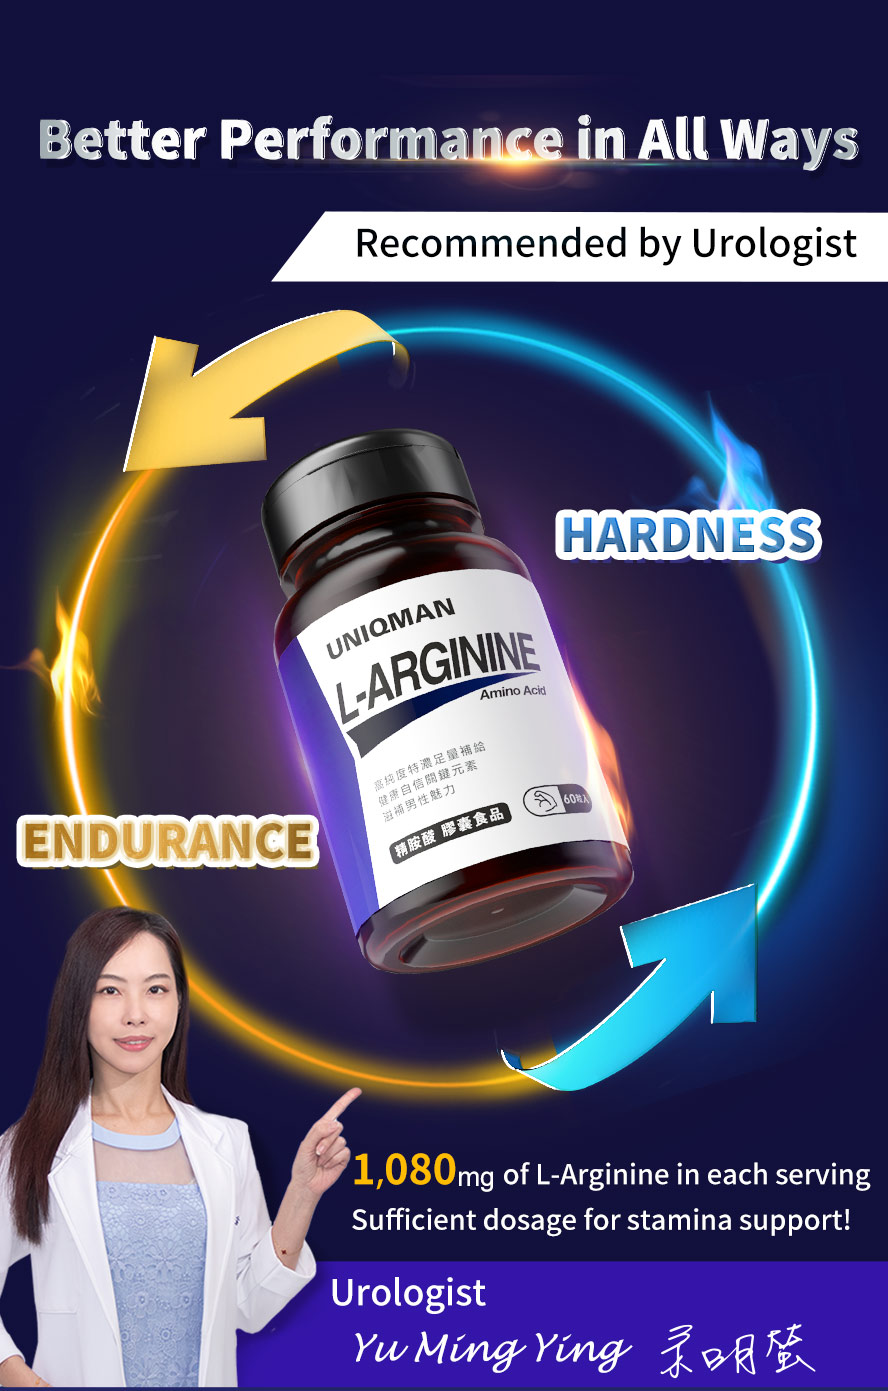 UNIQMAN L-Arginine contains 1080mg of pure arginine per serving, which is recommended by urologists as the best support for stamina, endurance, and hardness during intensity activity.